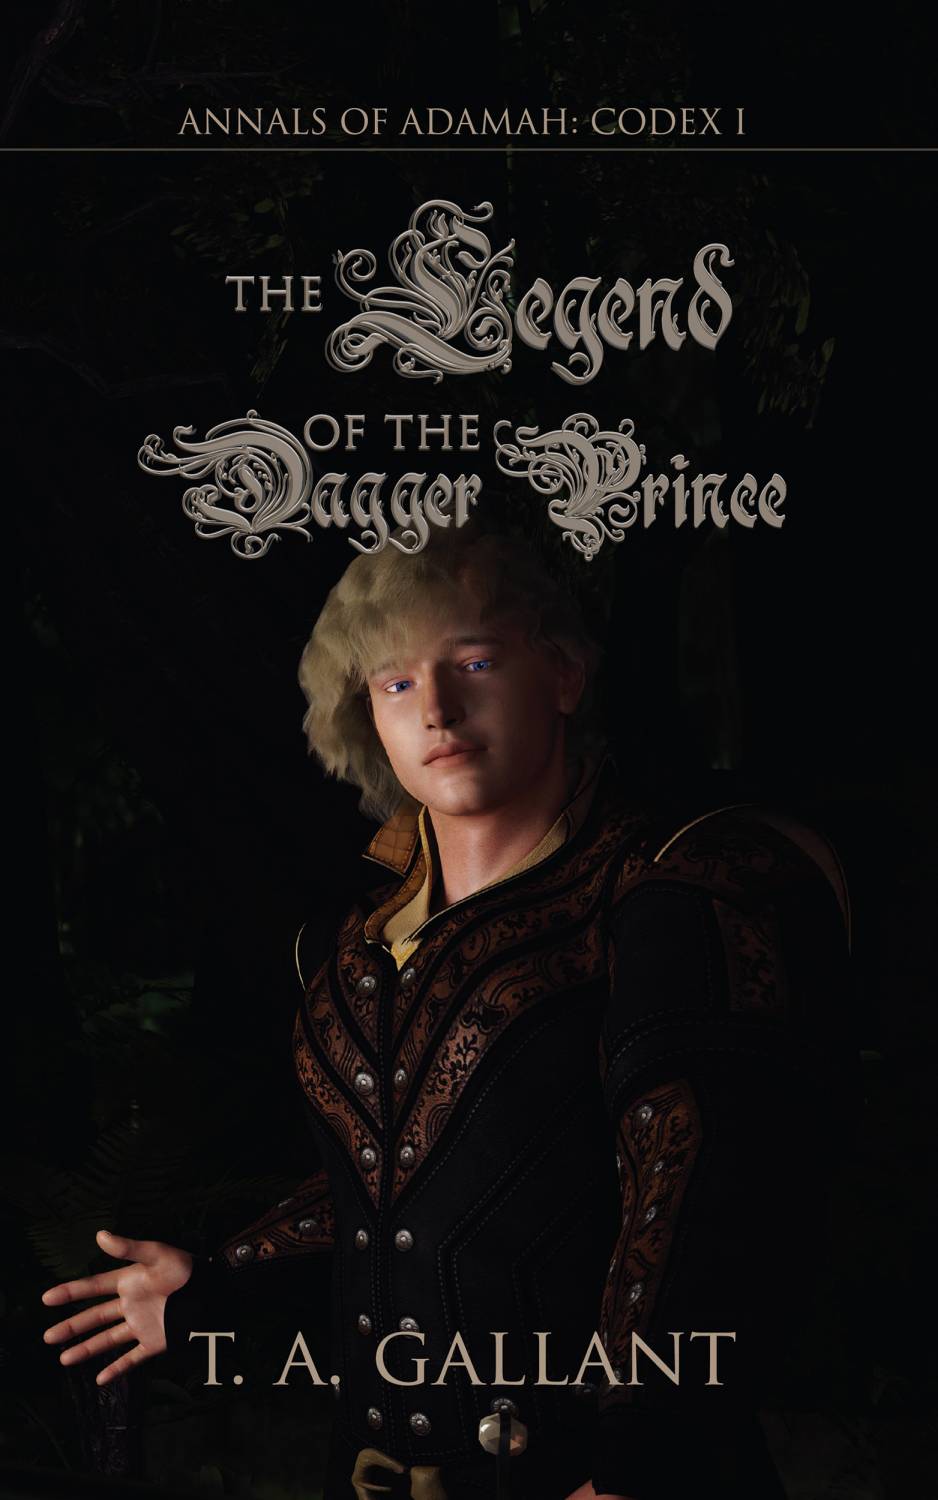 The Legend of the Dagger Prince